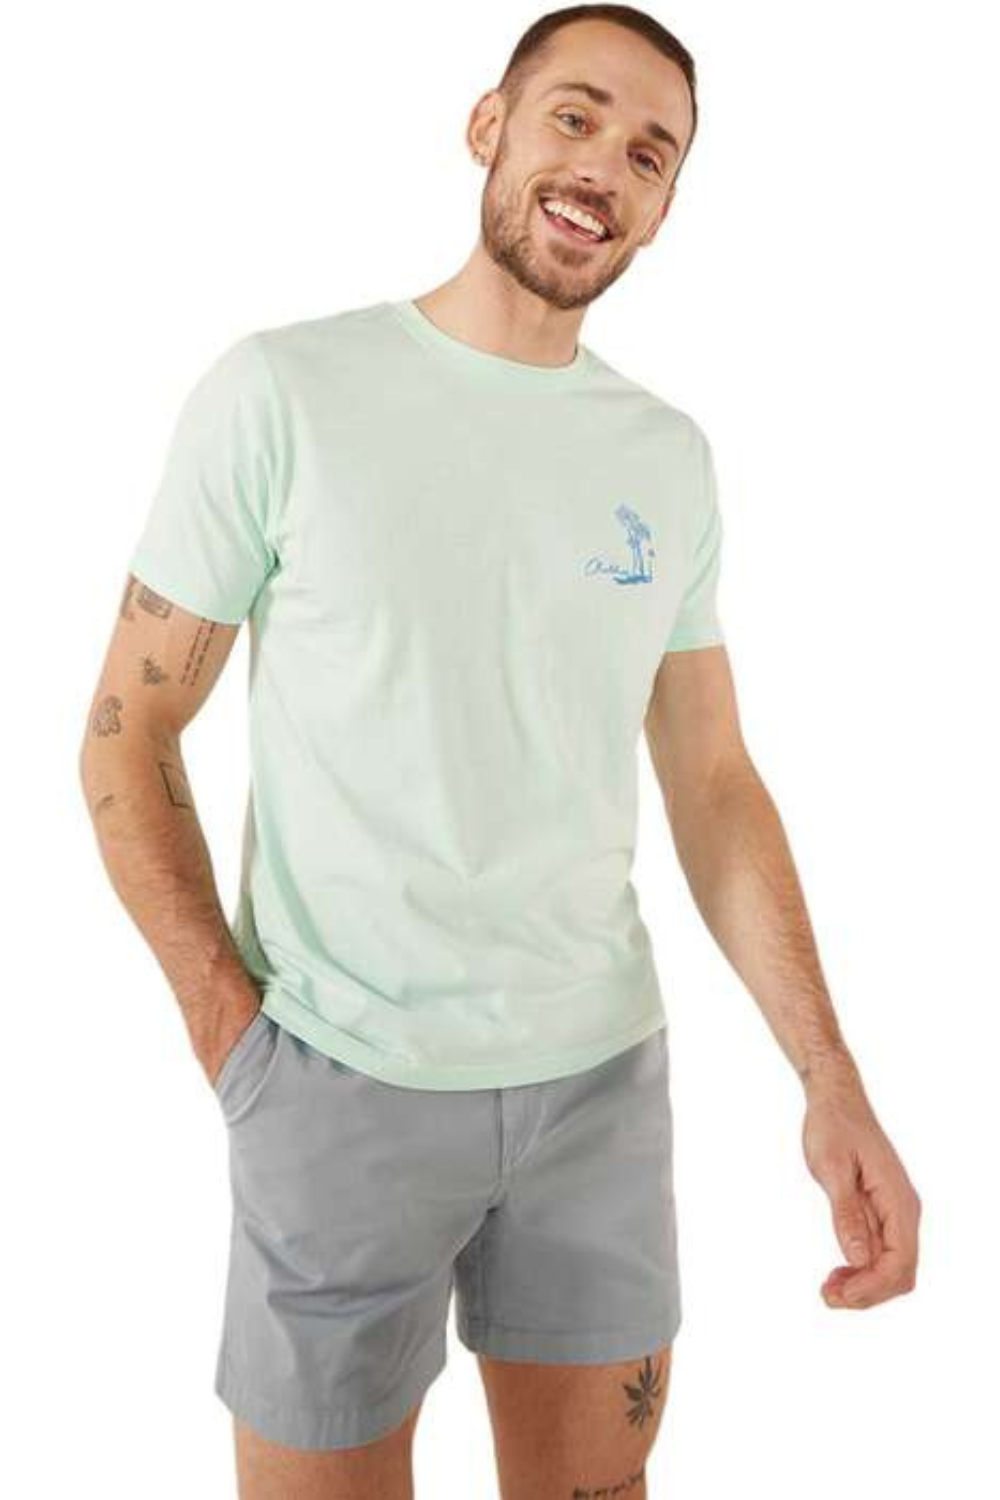 Chubbies The Float Your Boat T-Shirt - Teal